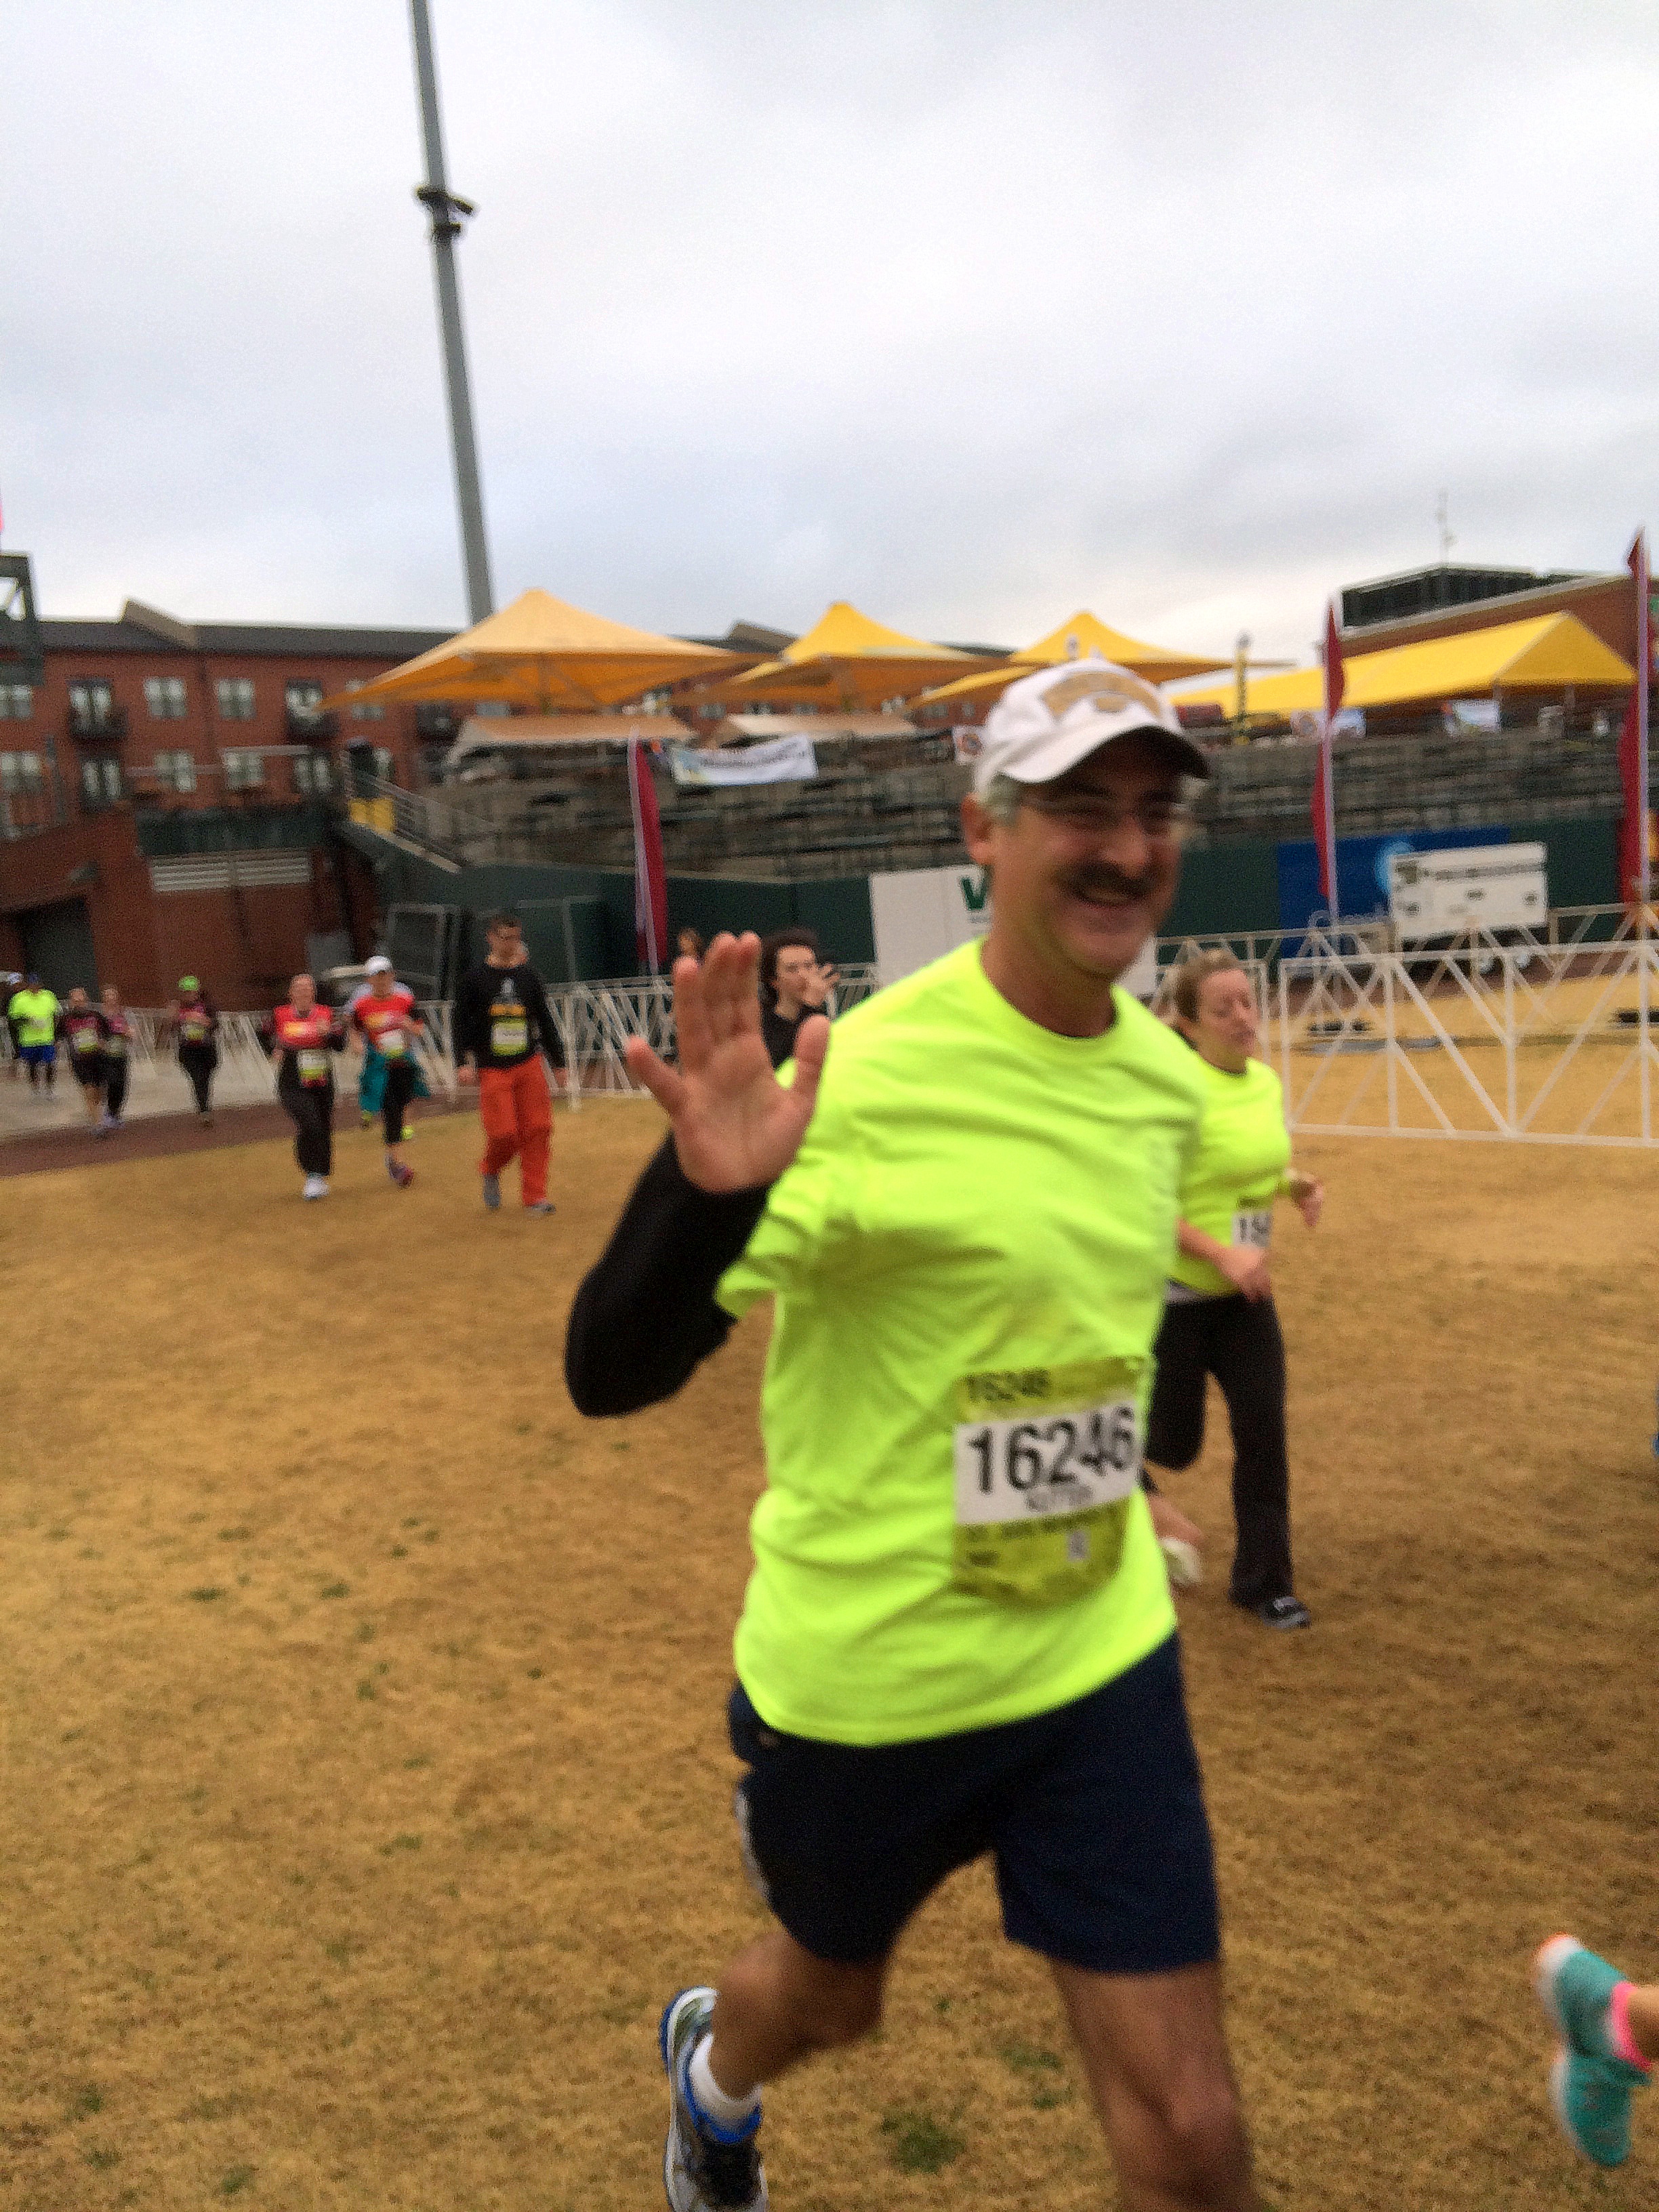 Dr. Kutteh finishes the 5K